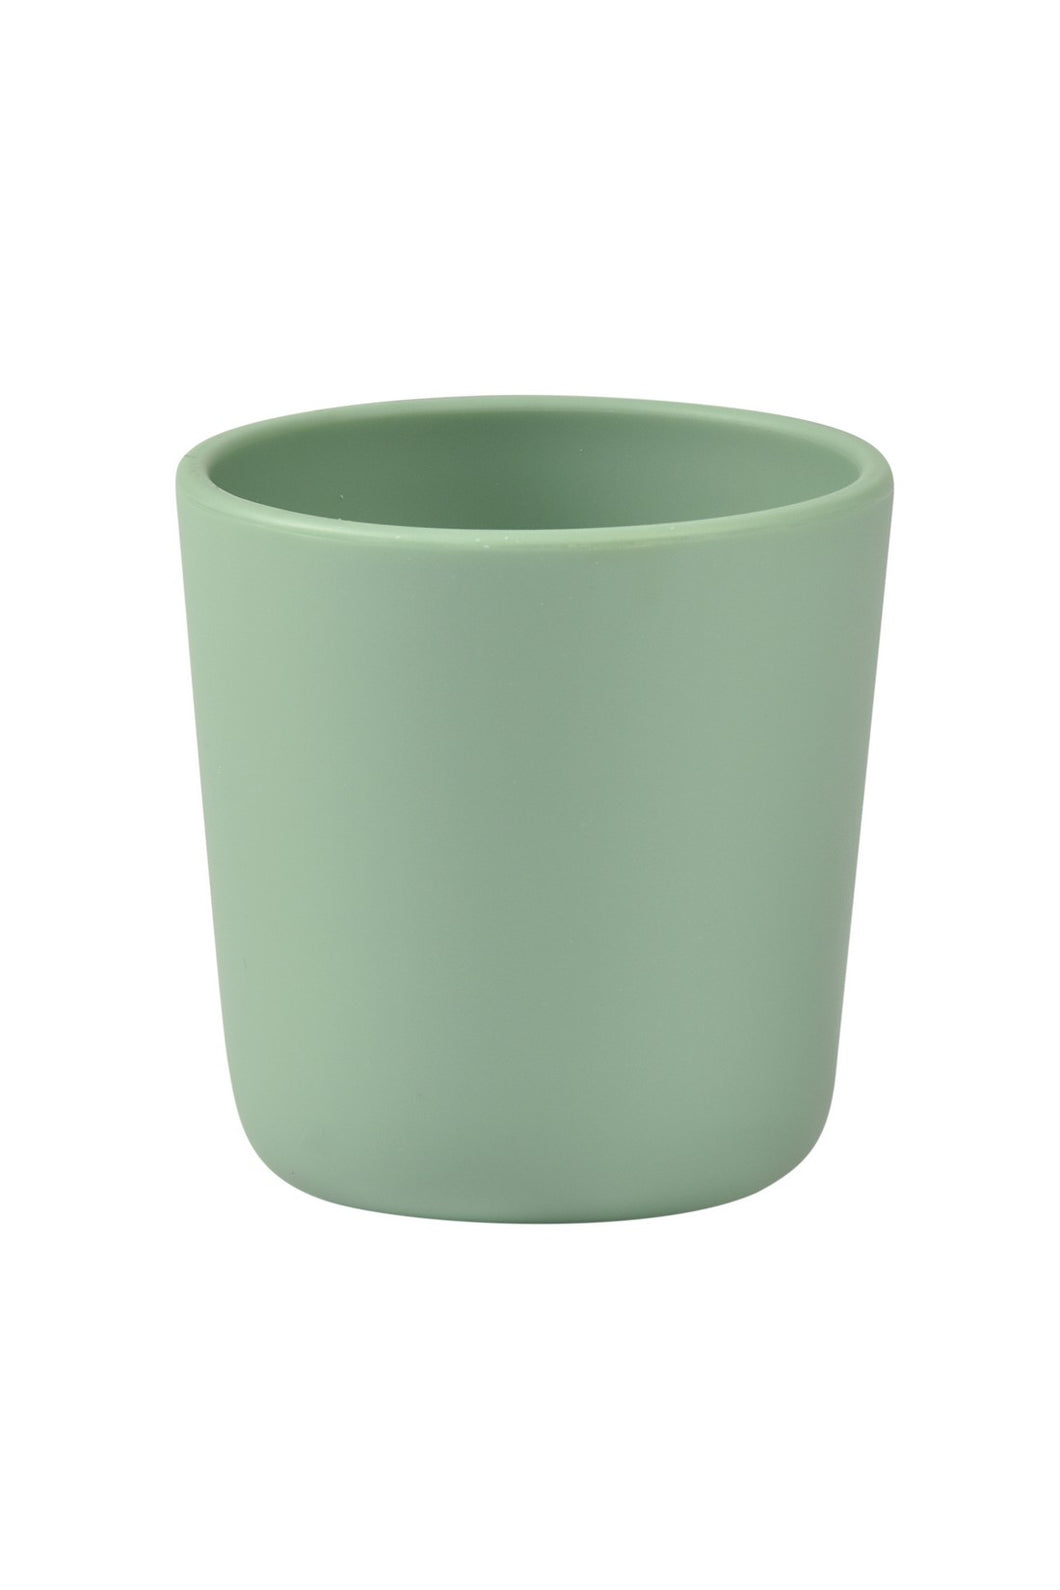 Beaba Silicone Cup - Sage Green 1